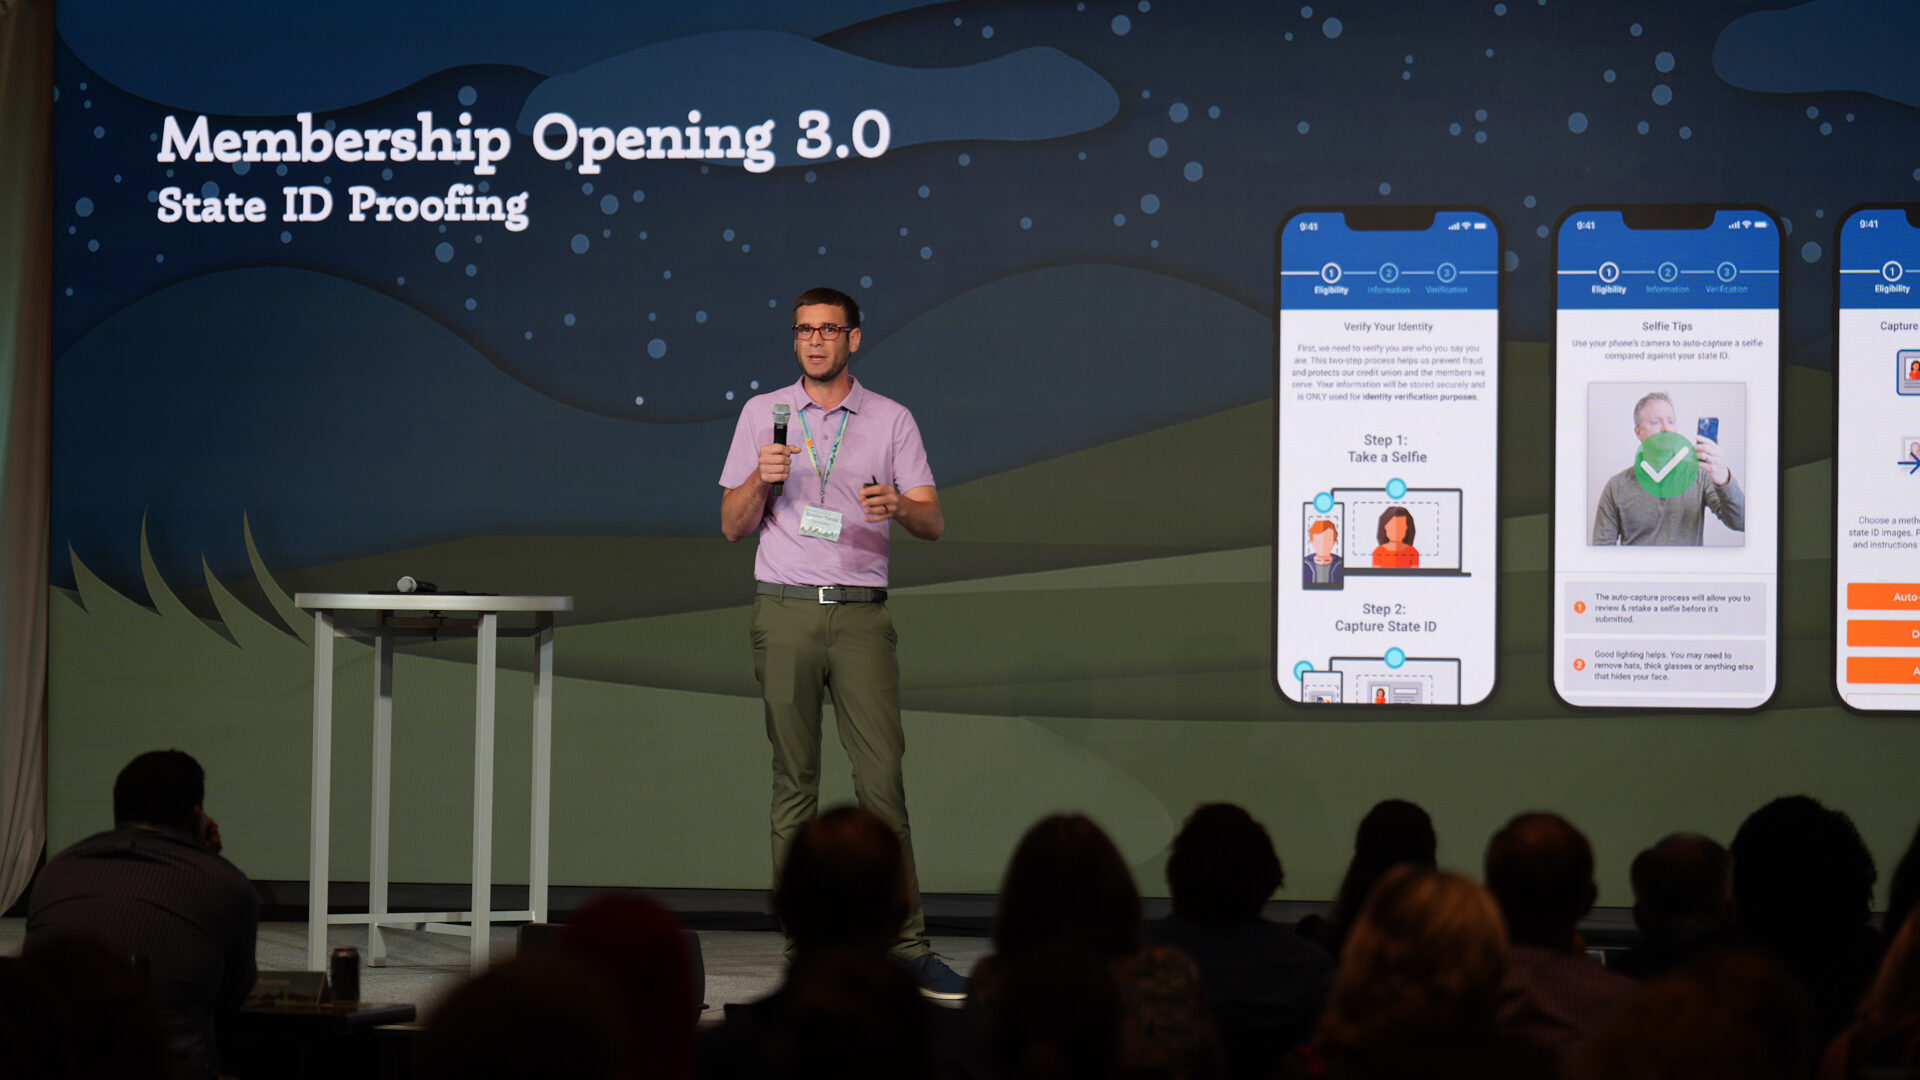 VP Kristian Daniel shares enhancements to the online membership opening process.